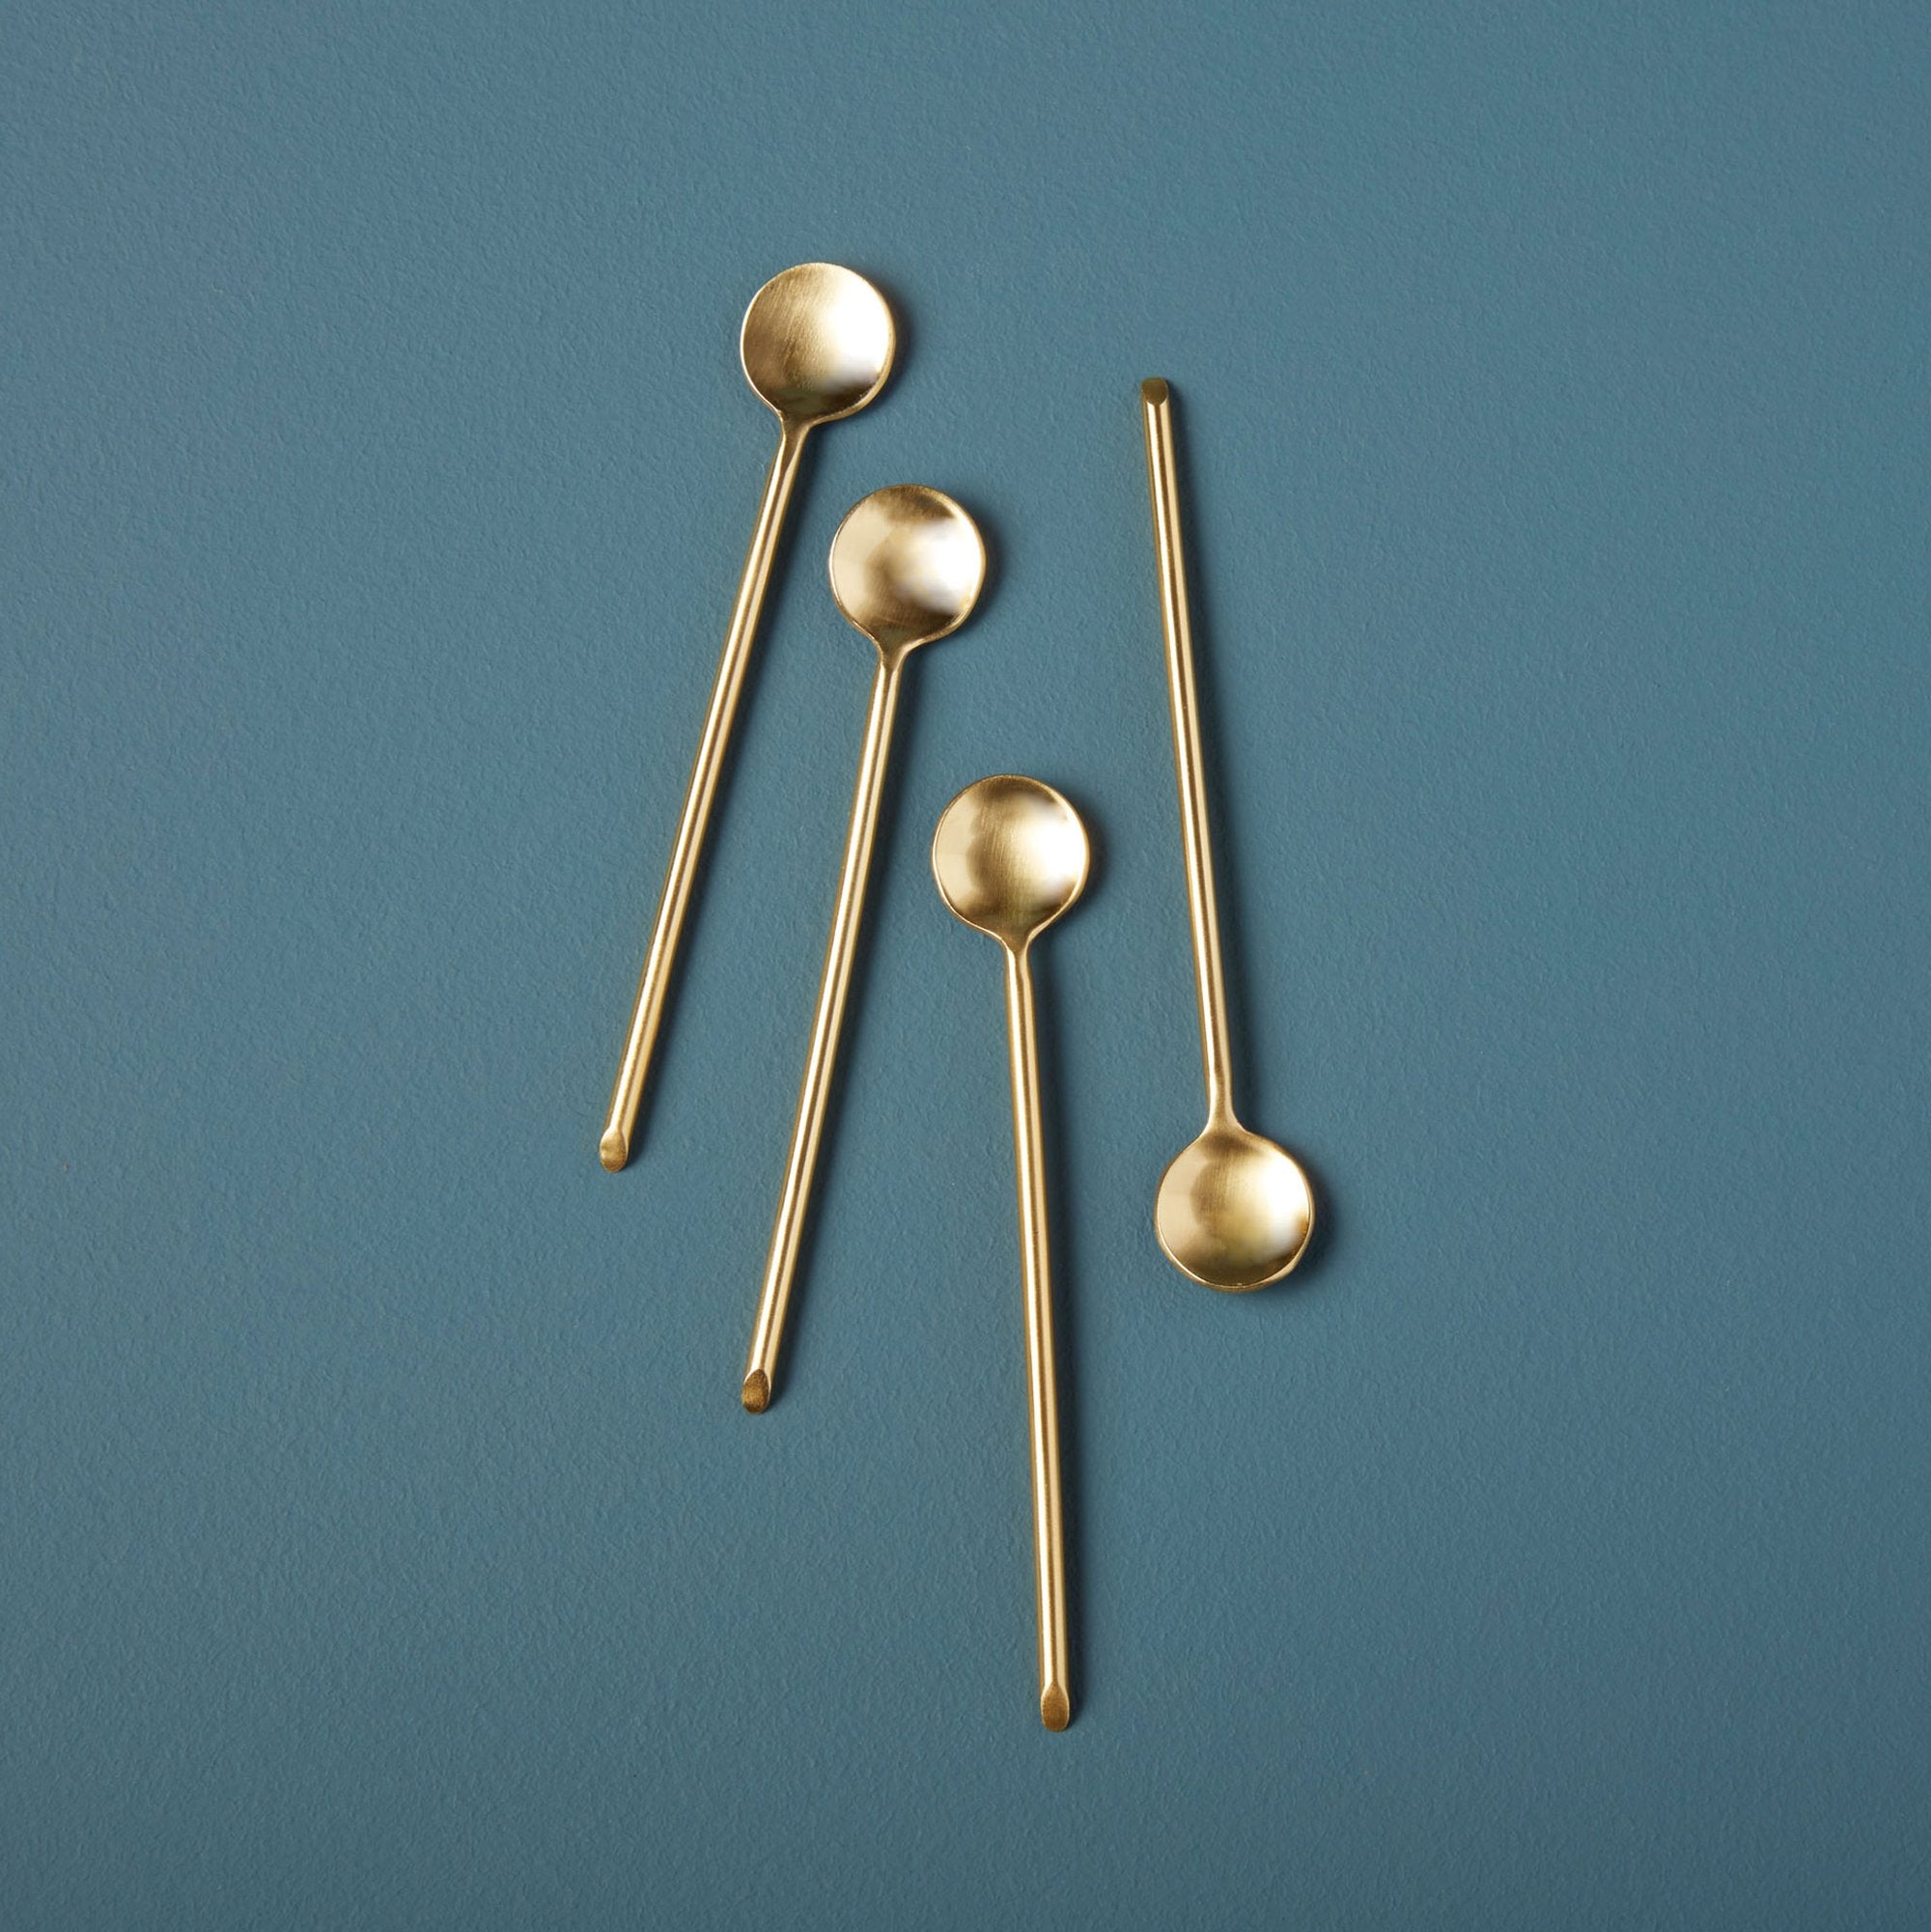 GOLD THIN SPOONS SET4